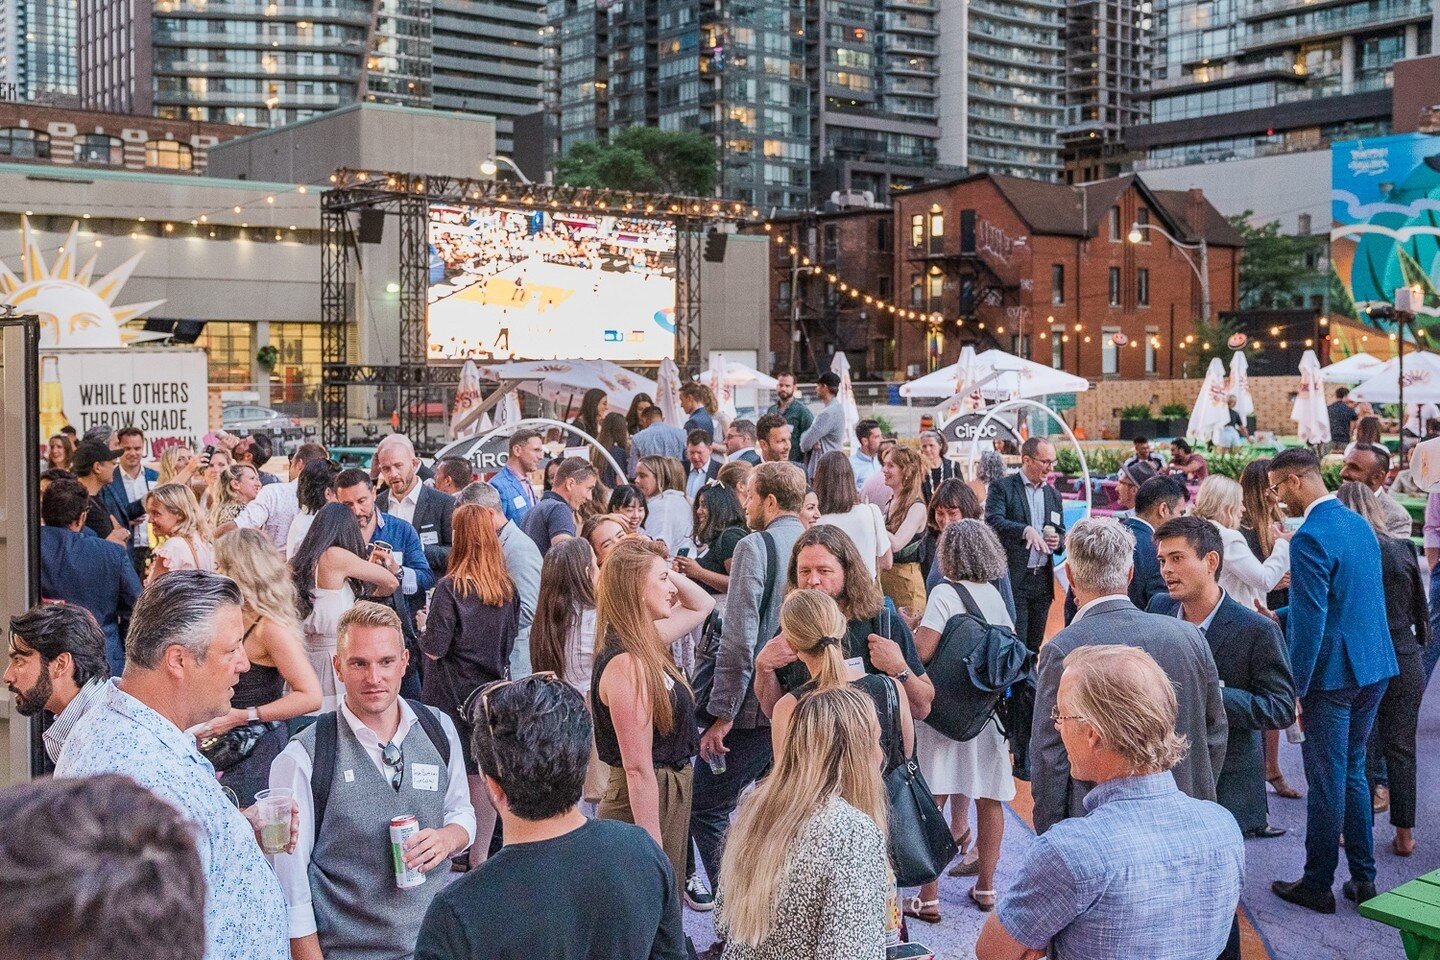 Throwing it back to last year's unforgettable ULI Toronto Summer Social! Professionals from the real estate and development industries came together for an epic networking event. The RendezViews patio, hosted by The Fifth Social Club and The Ballroom